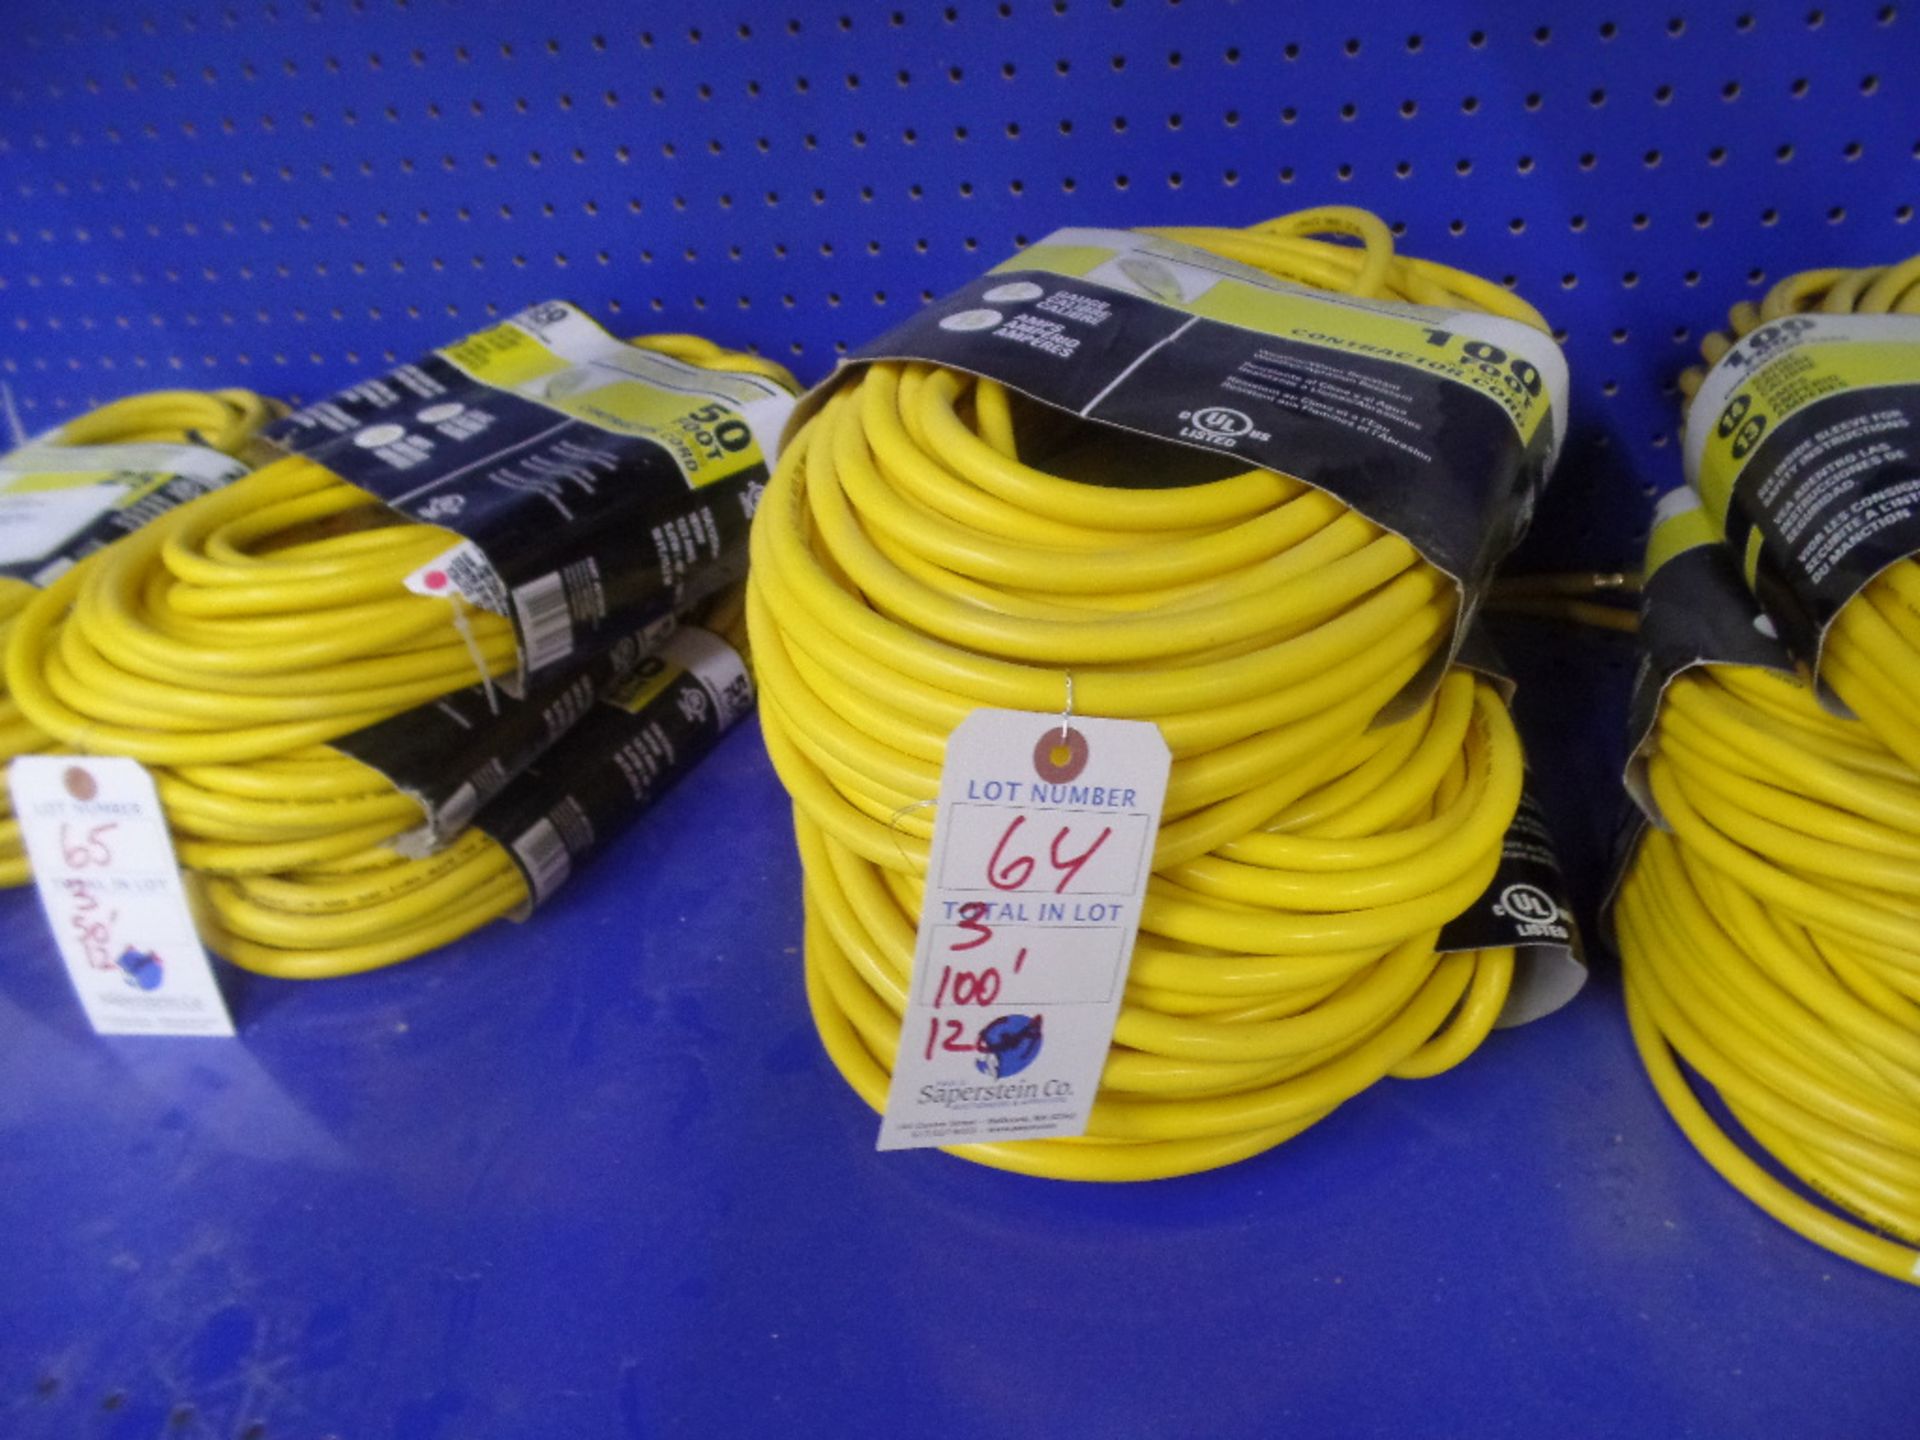 (3) Power Phase 100' 12 Gauge Contractor Extension Cords